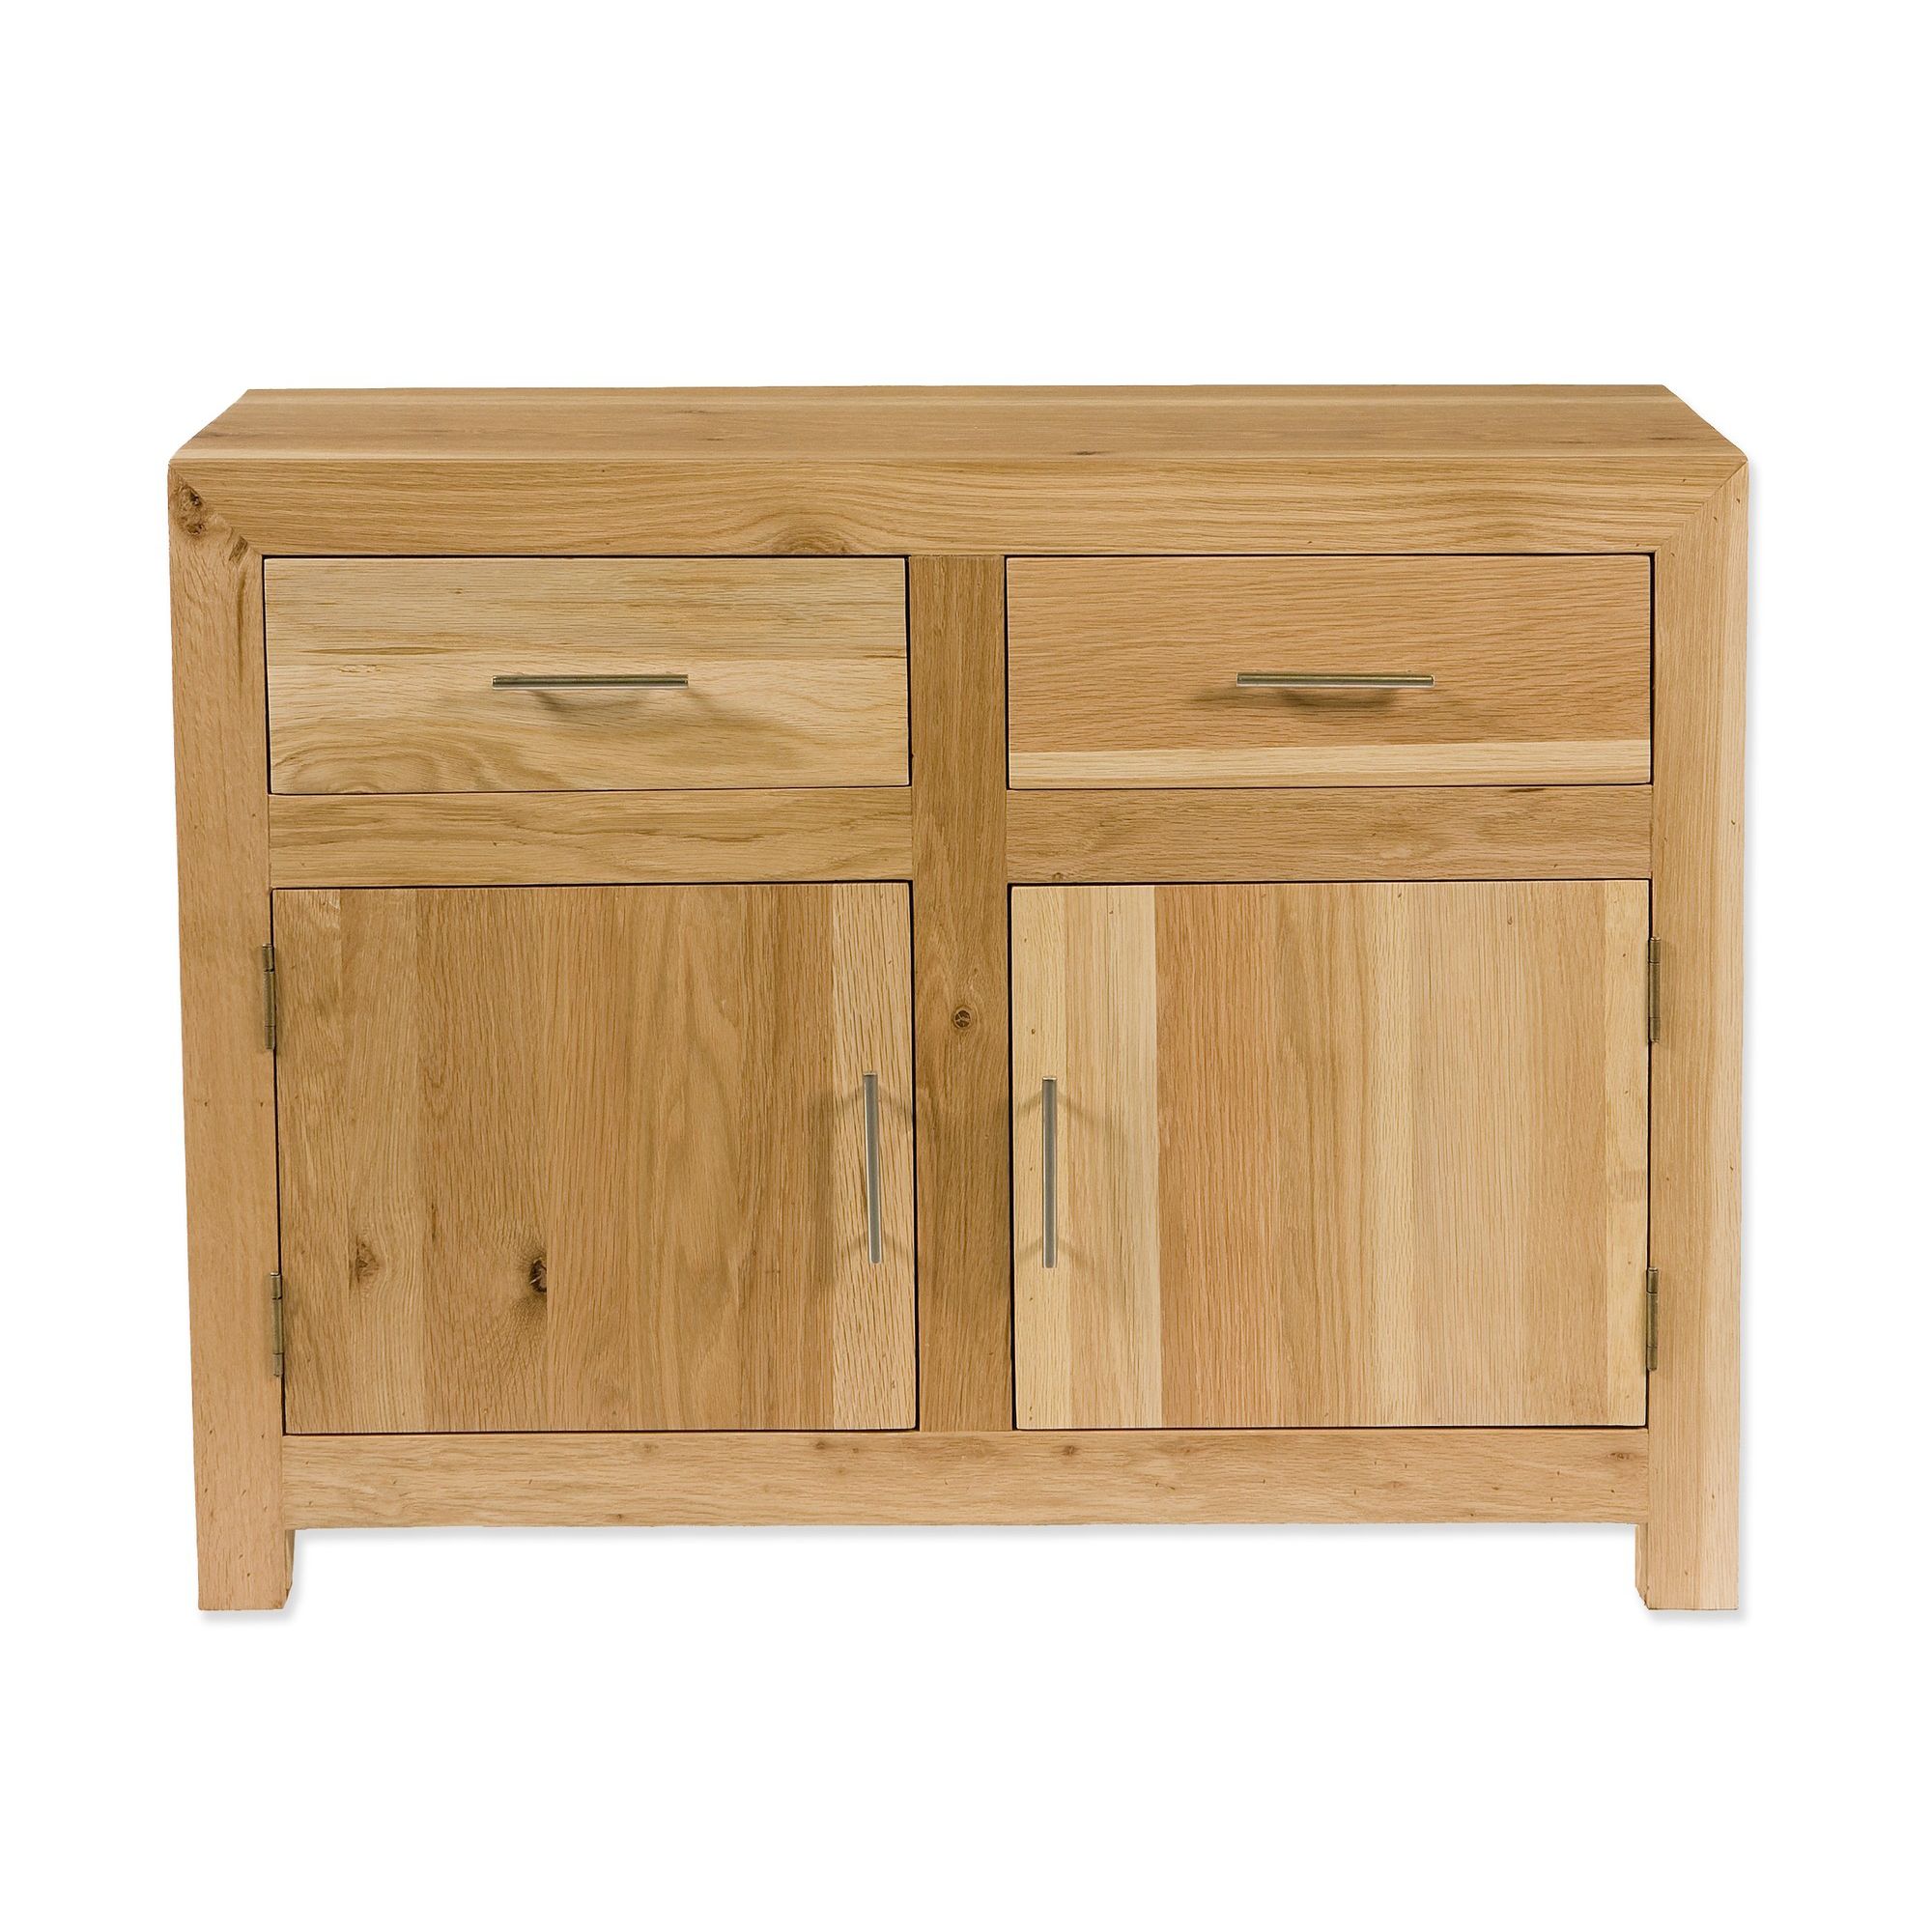 Elements Ashgrove Two Door Sideboard in Natural Lacquer at Tesco Direct